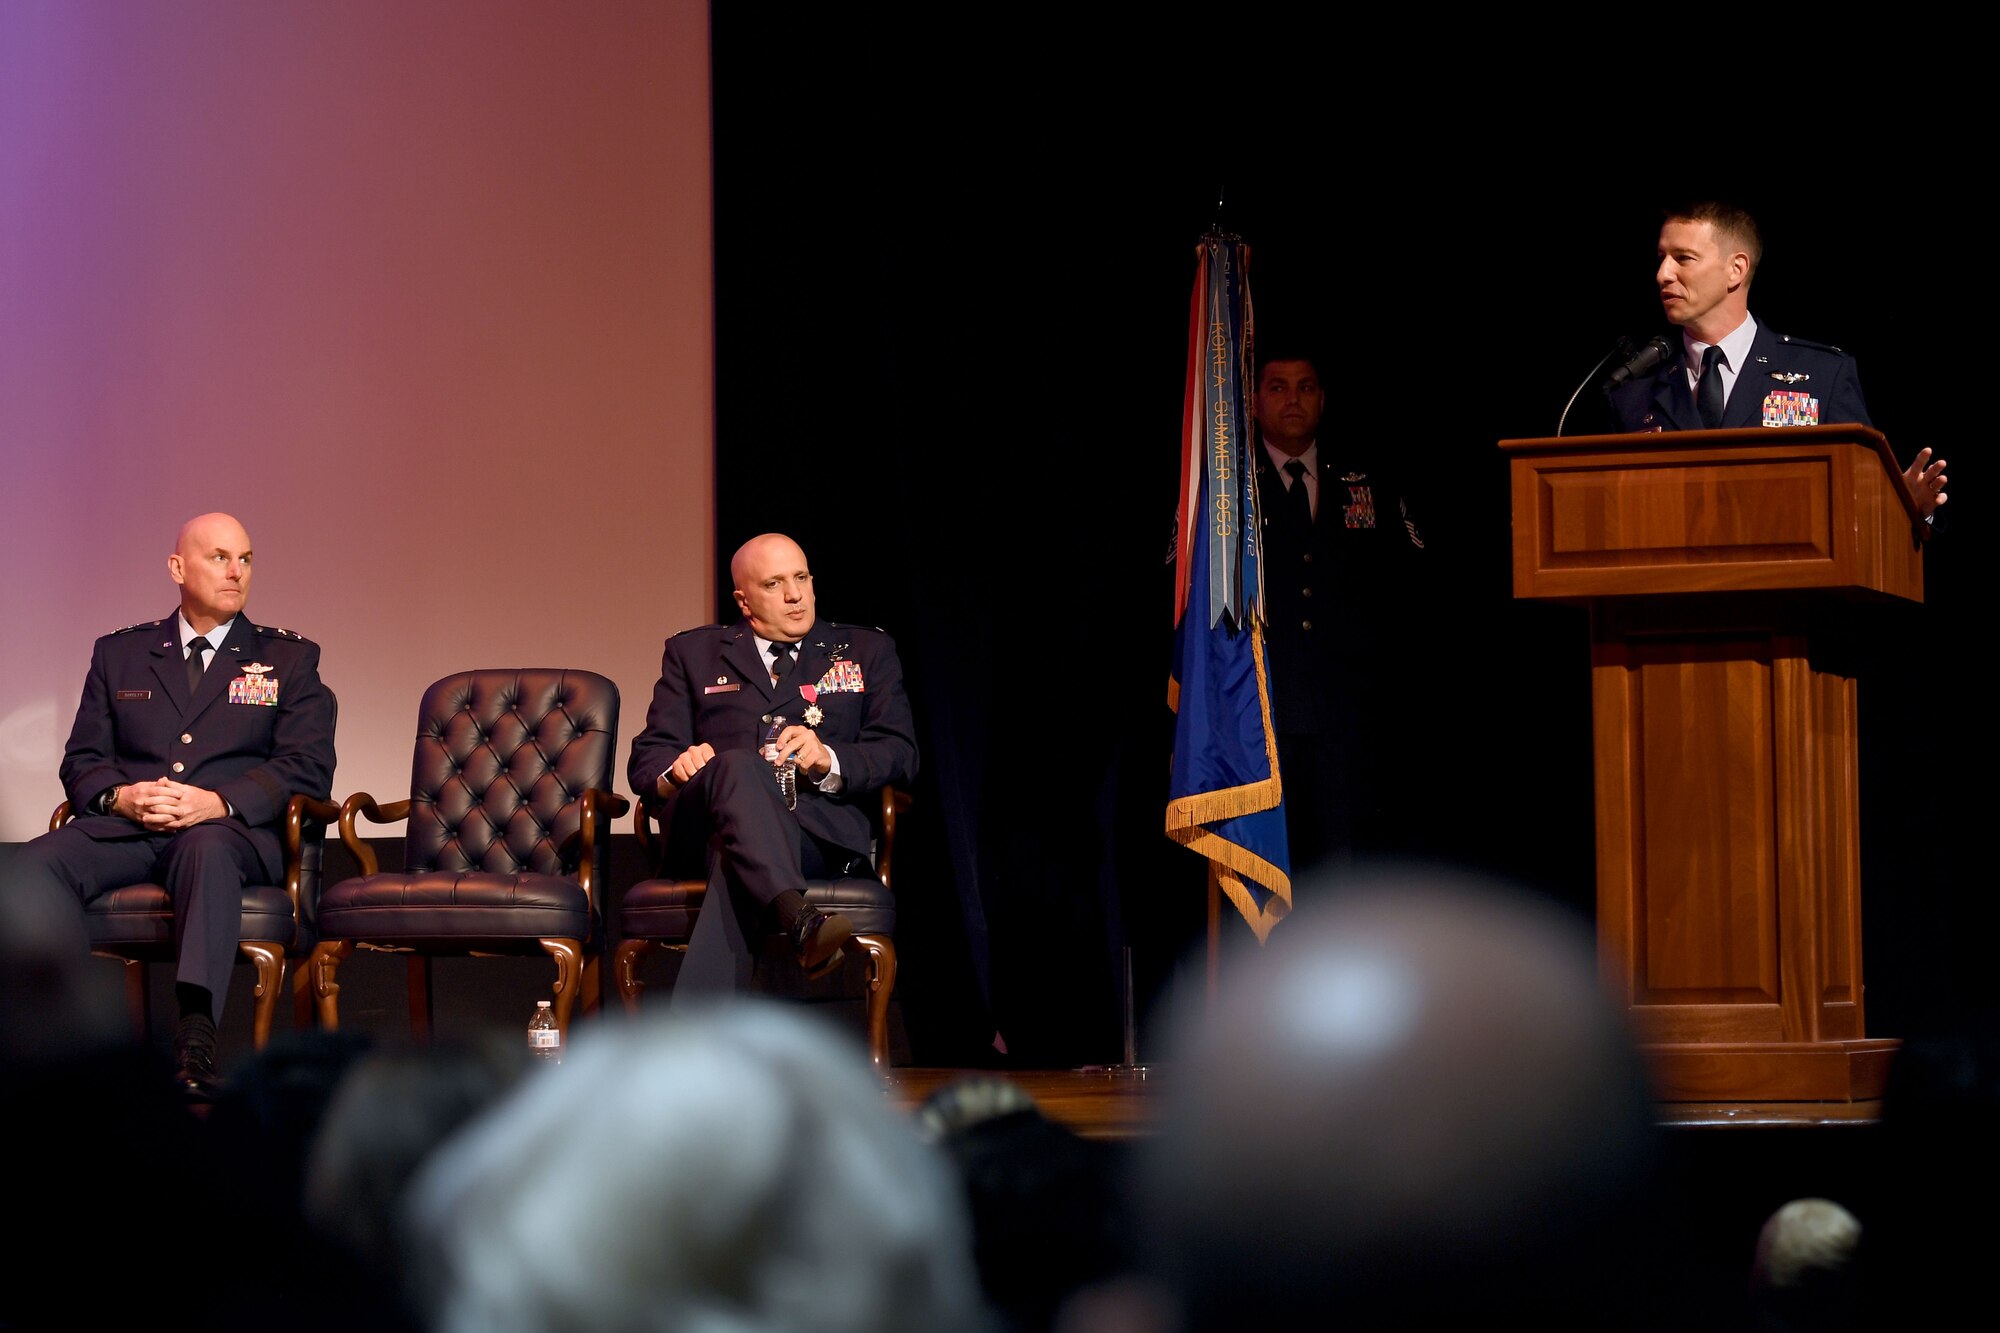 Four Airmen stand on stage during a ceremony